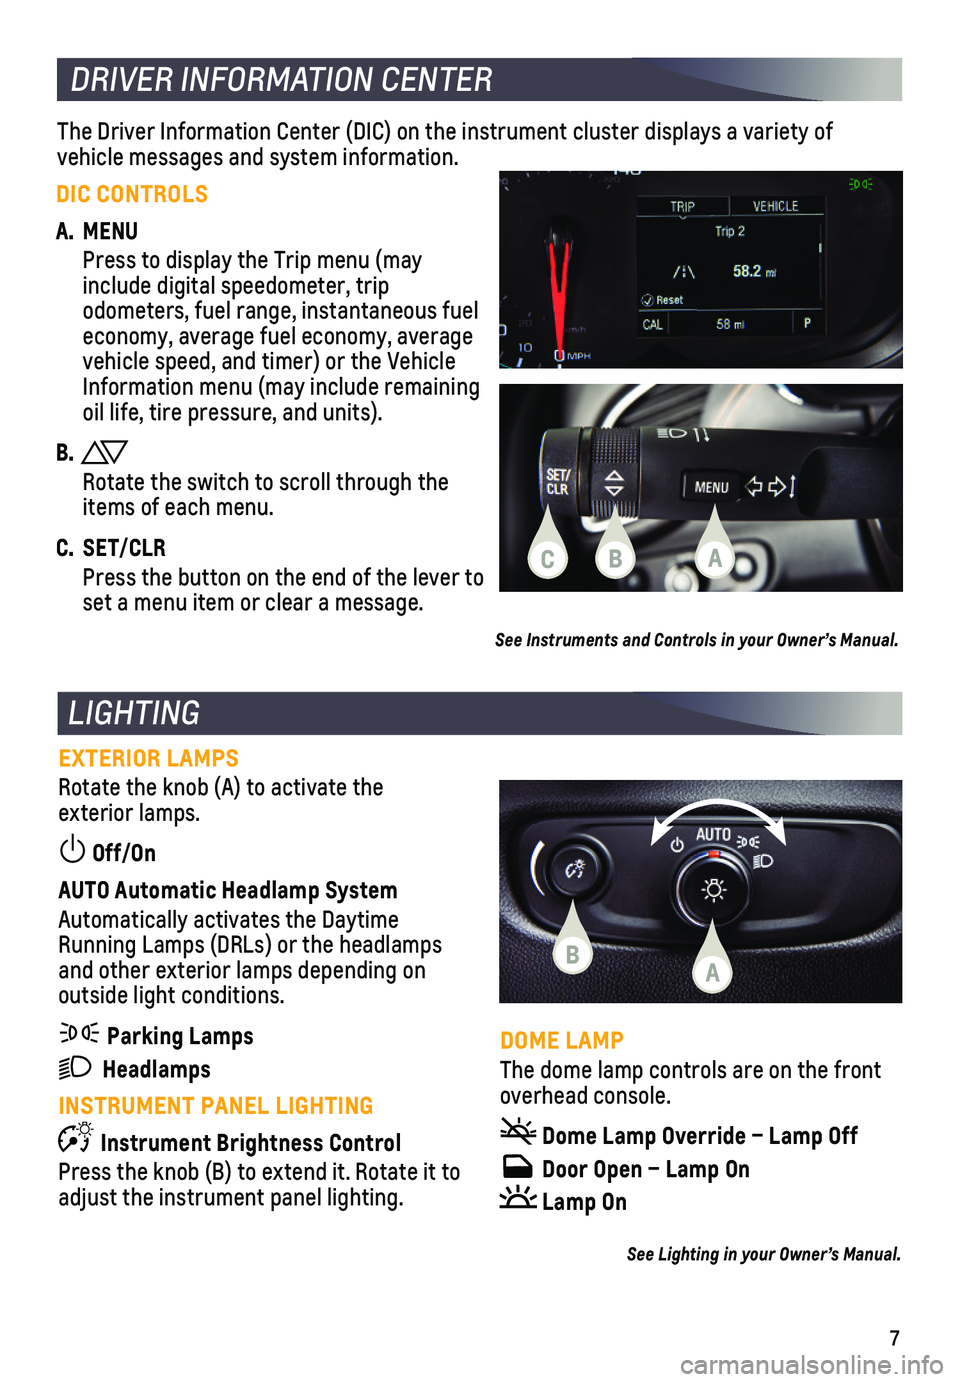 CHEVROLET TRAX 2021  Get To Know Guide 7
EXTERIOR LAMPS
Rotate the knob (A) to activate the  exterior  lamps.
 Off/On
AUTO Automatic Headlamp System
Automatically activates the Daytime Running Lamps (DRLs) or the headlamps and other exteri